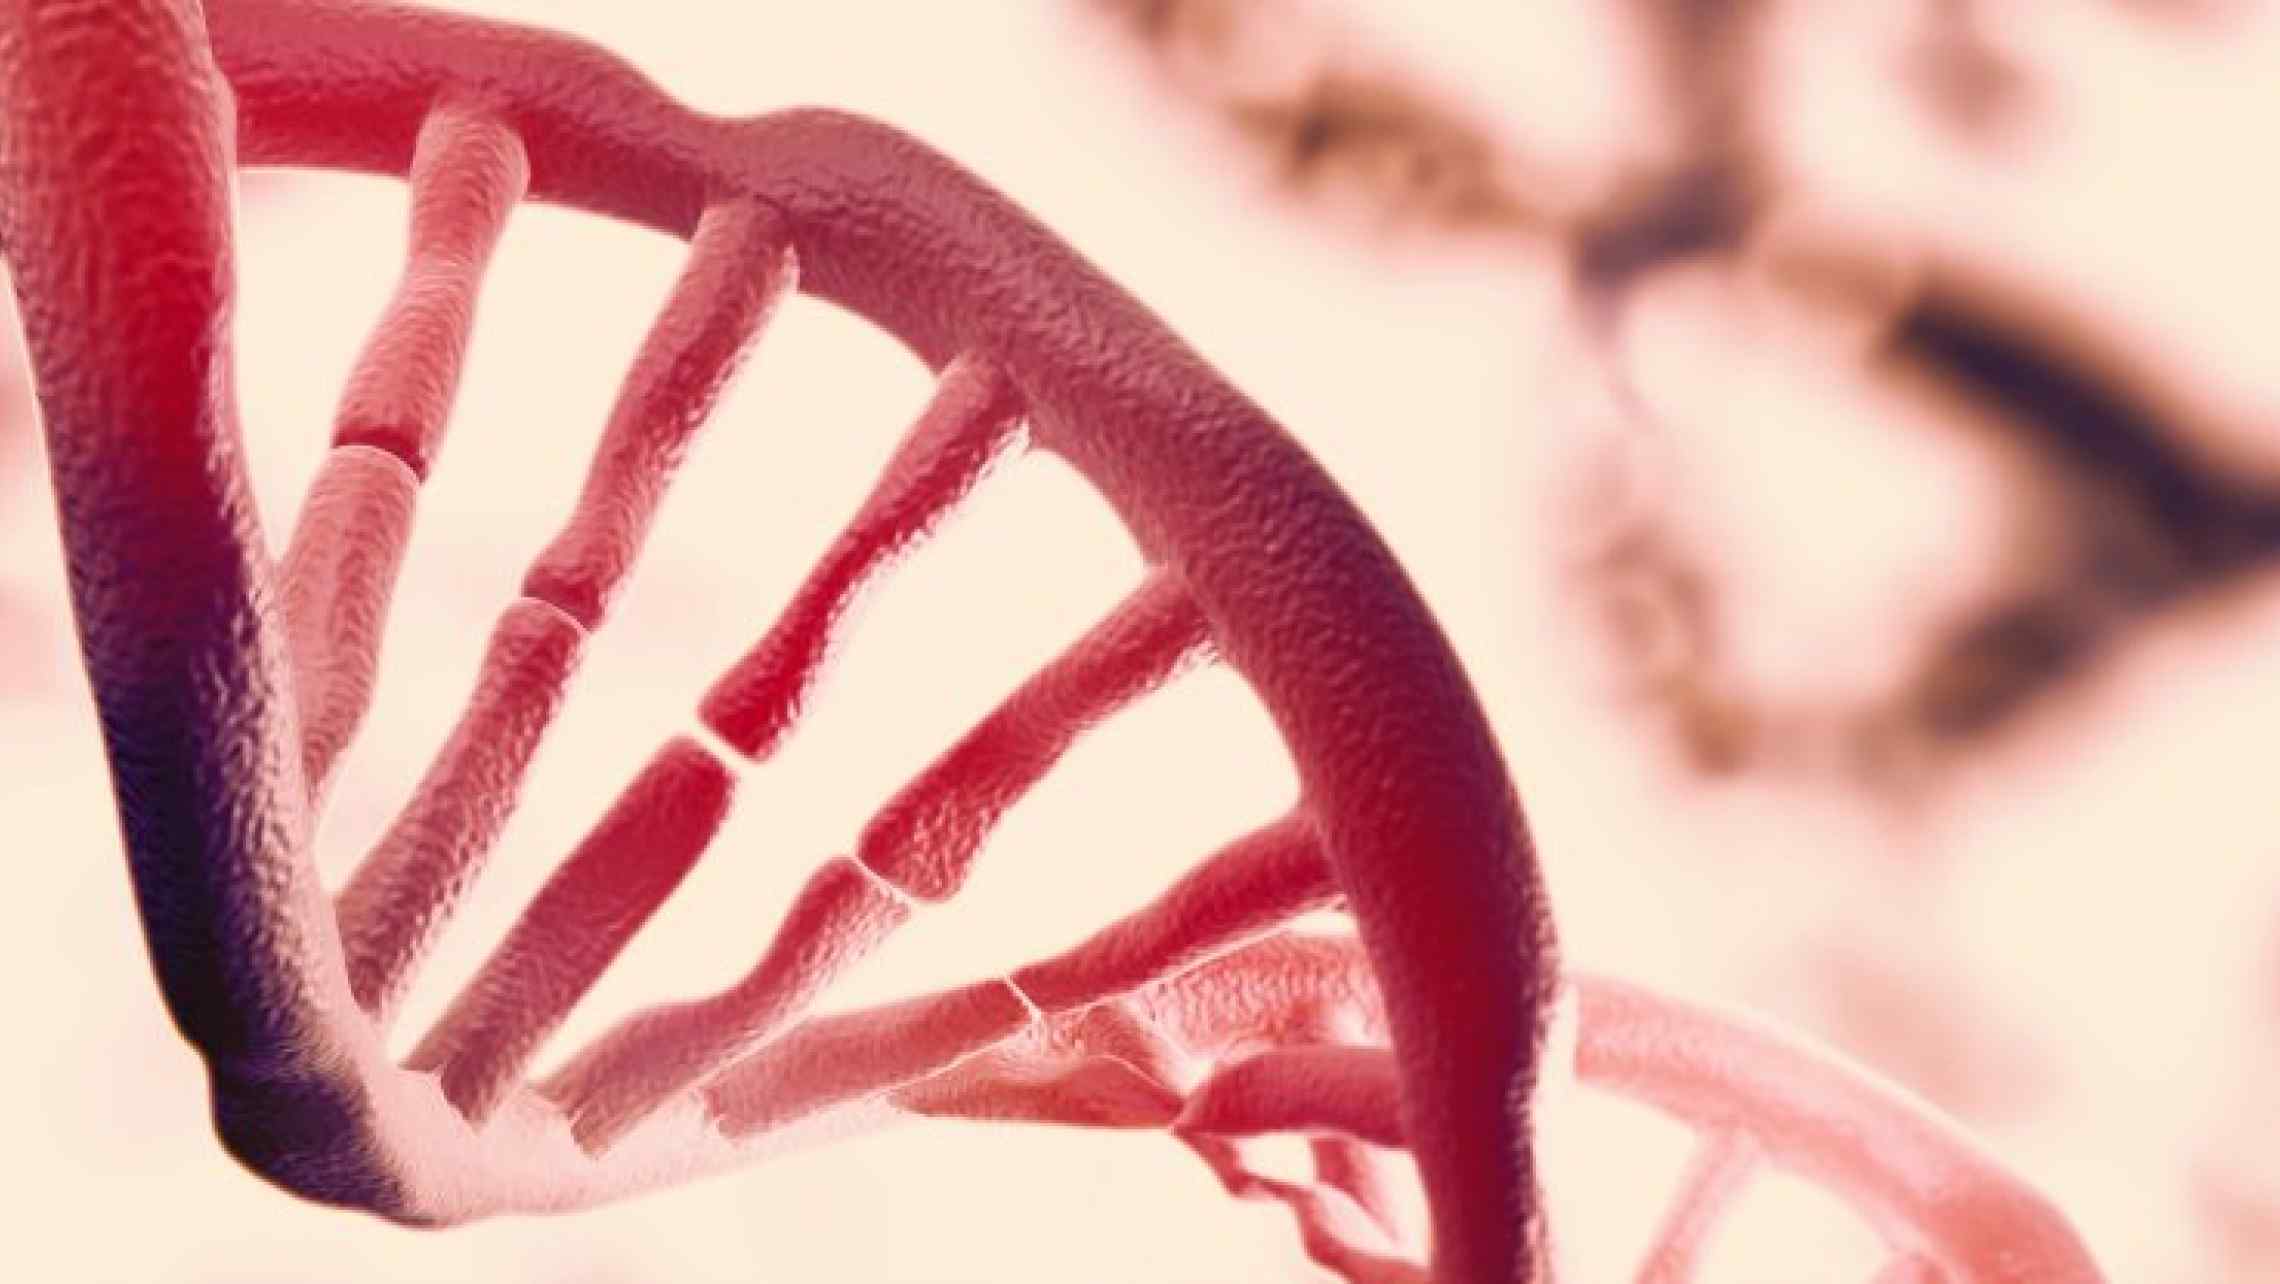 THERE IS A SECOND LAYER OF INFORMATION HIDDEN IN OUR DNA